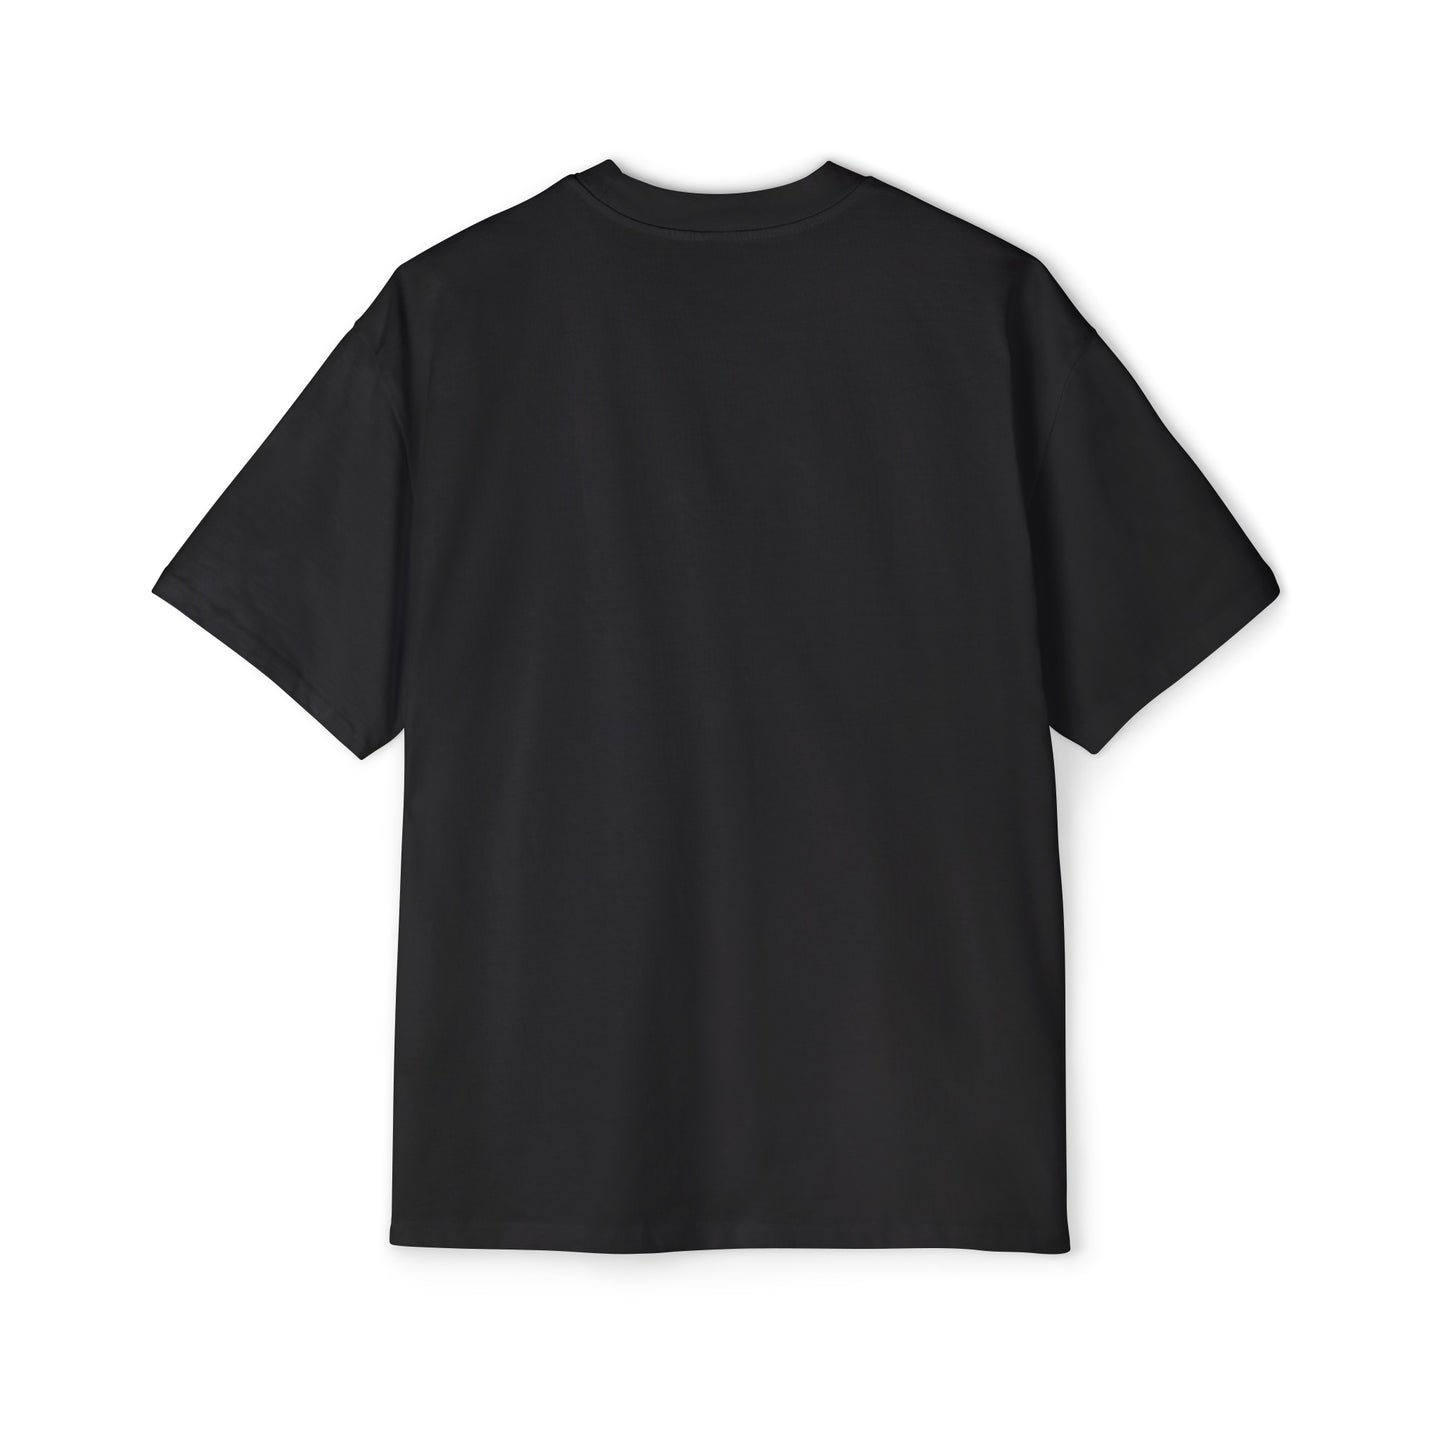 Chance Reeves Oversized Tee